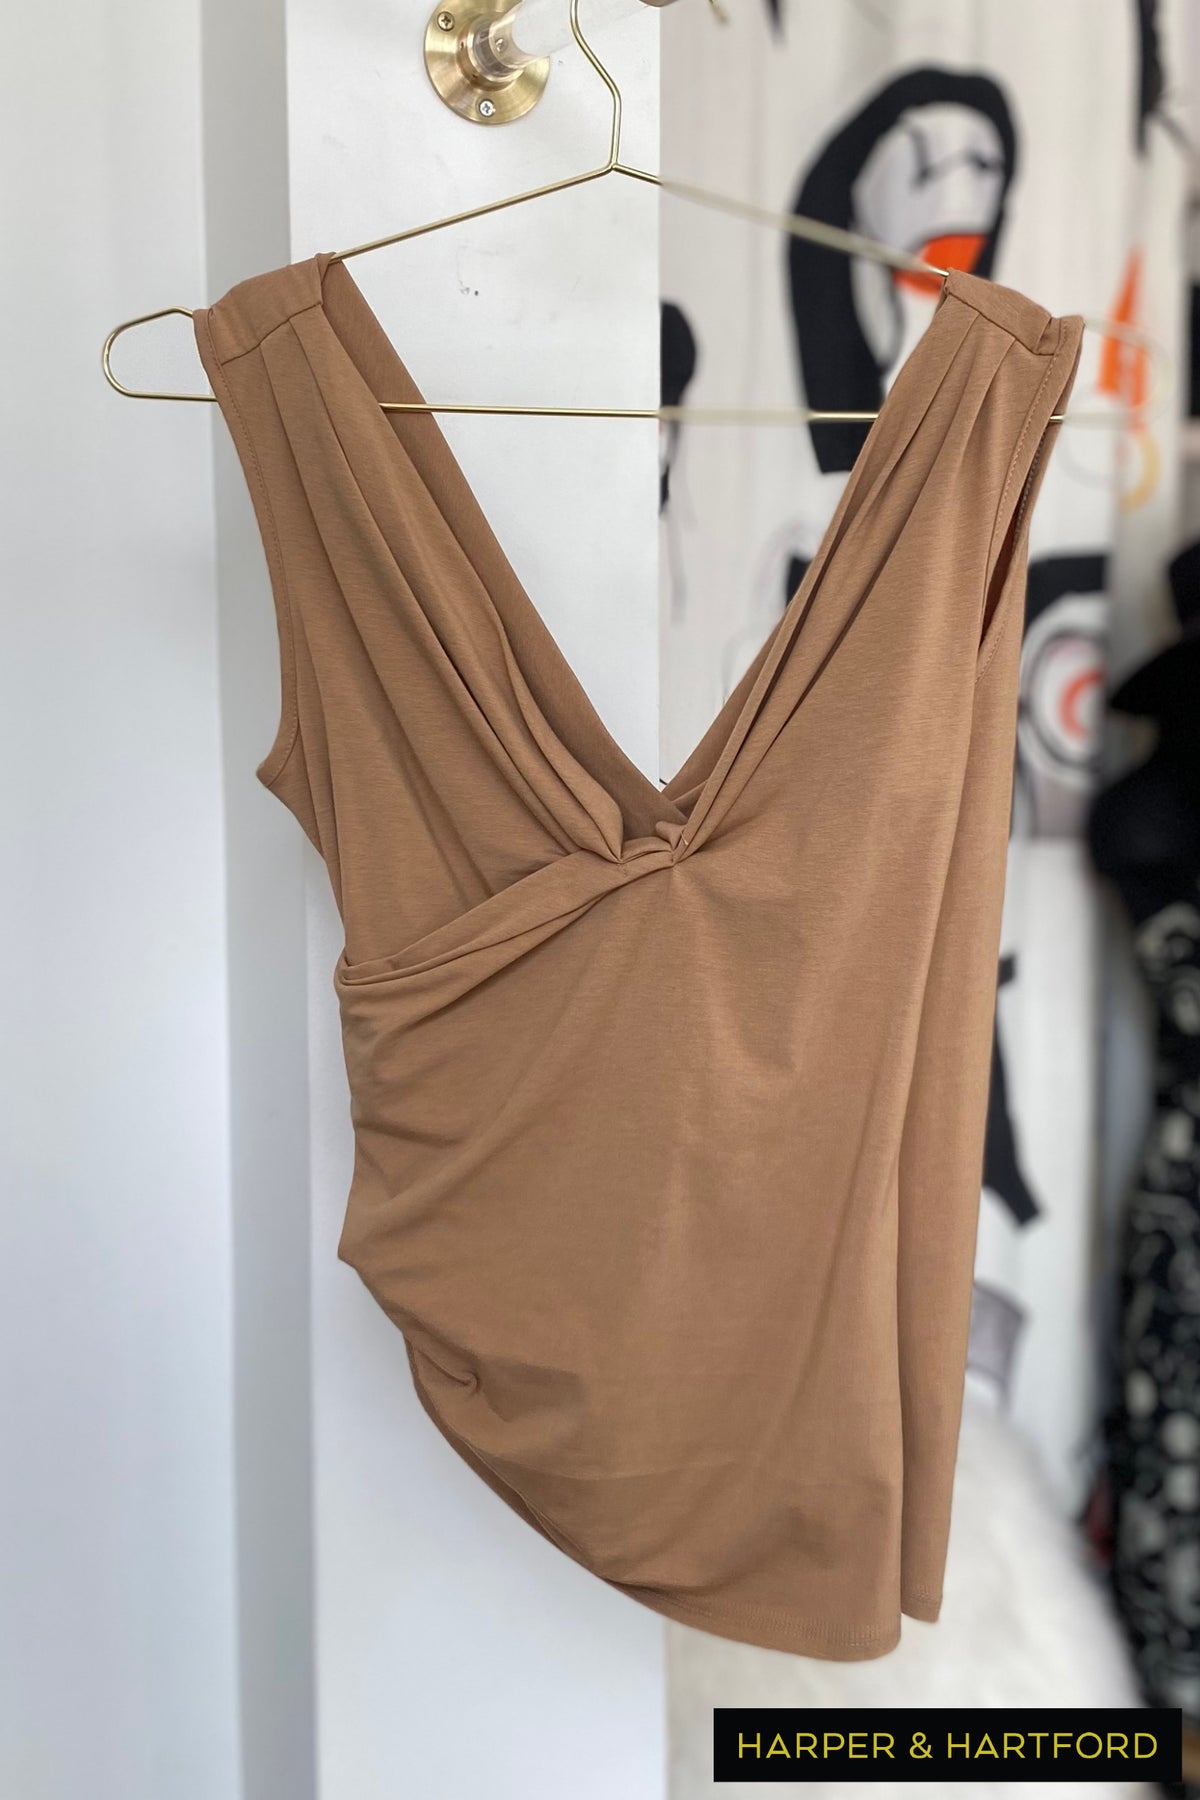 The Line By K Umi Top in Camel – and Hartford